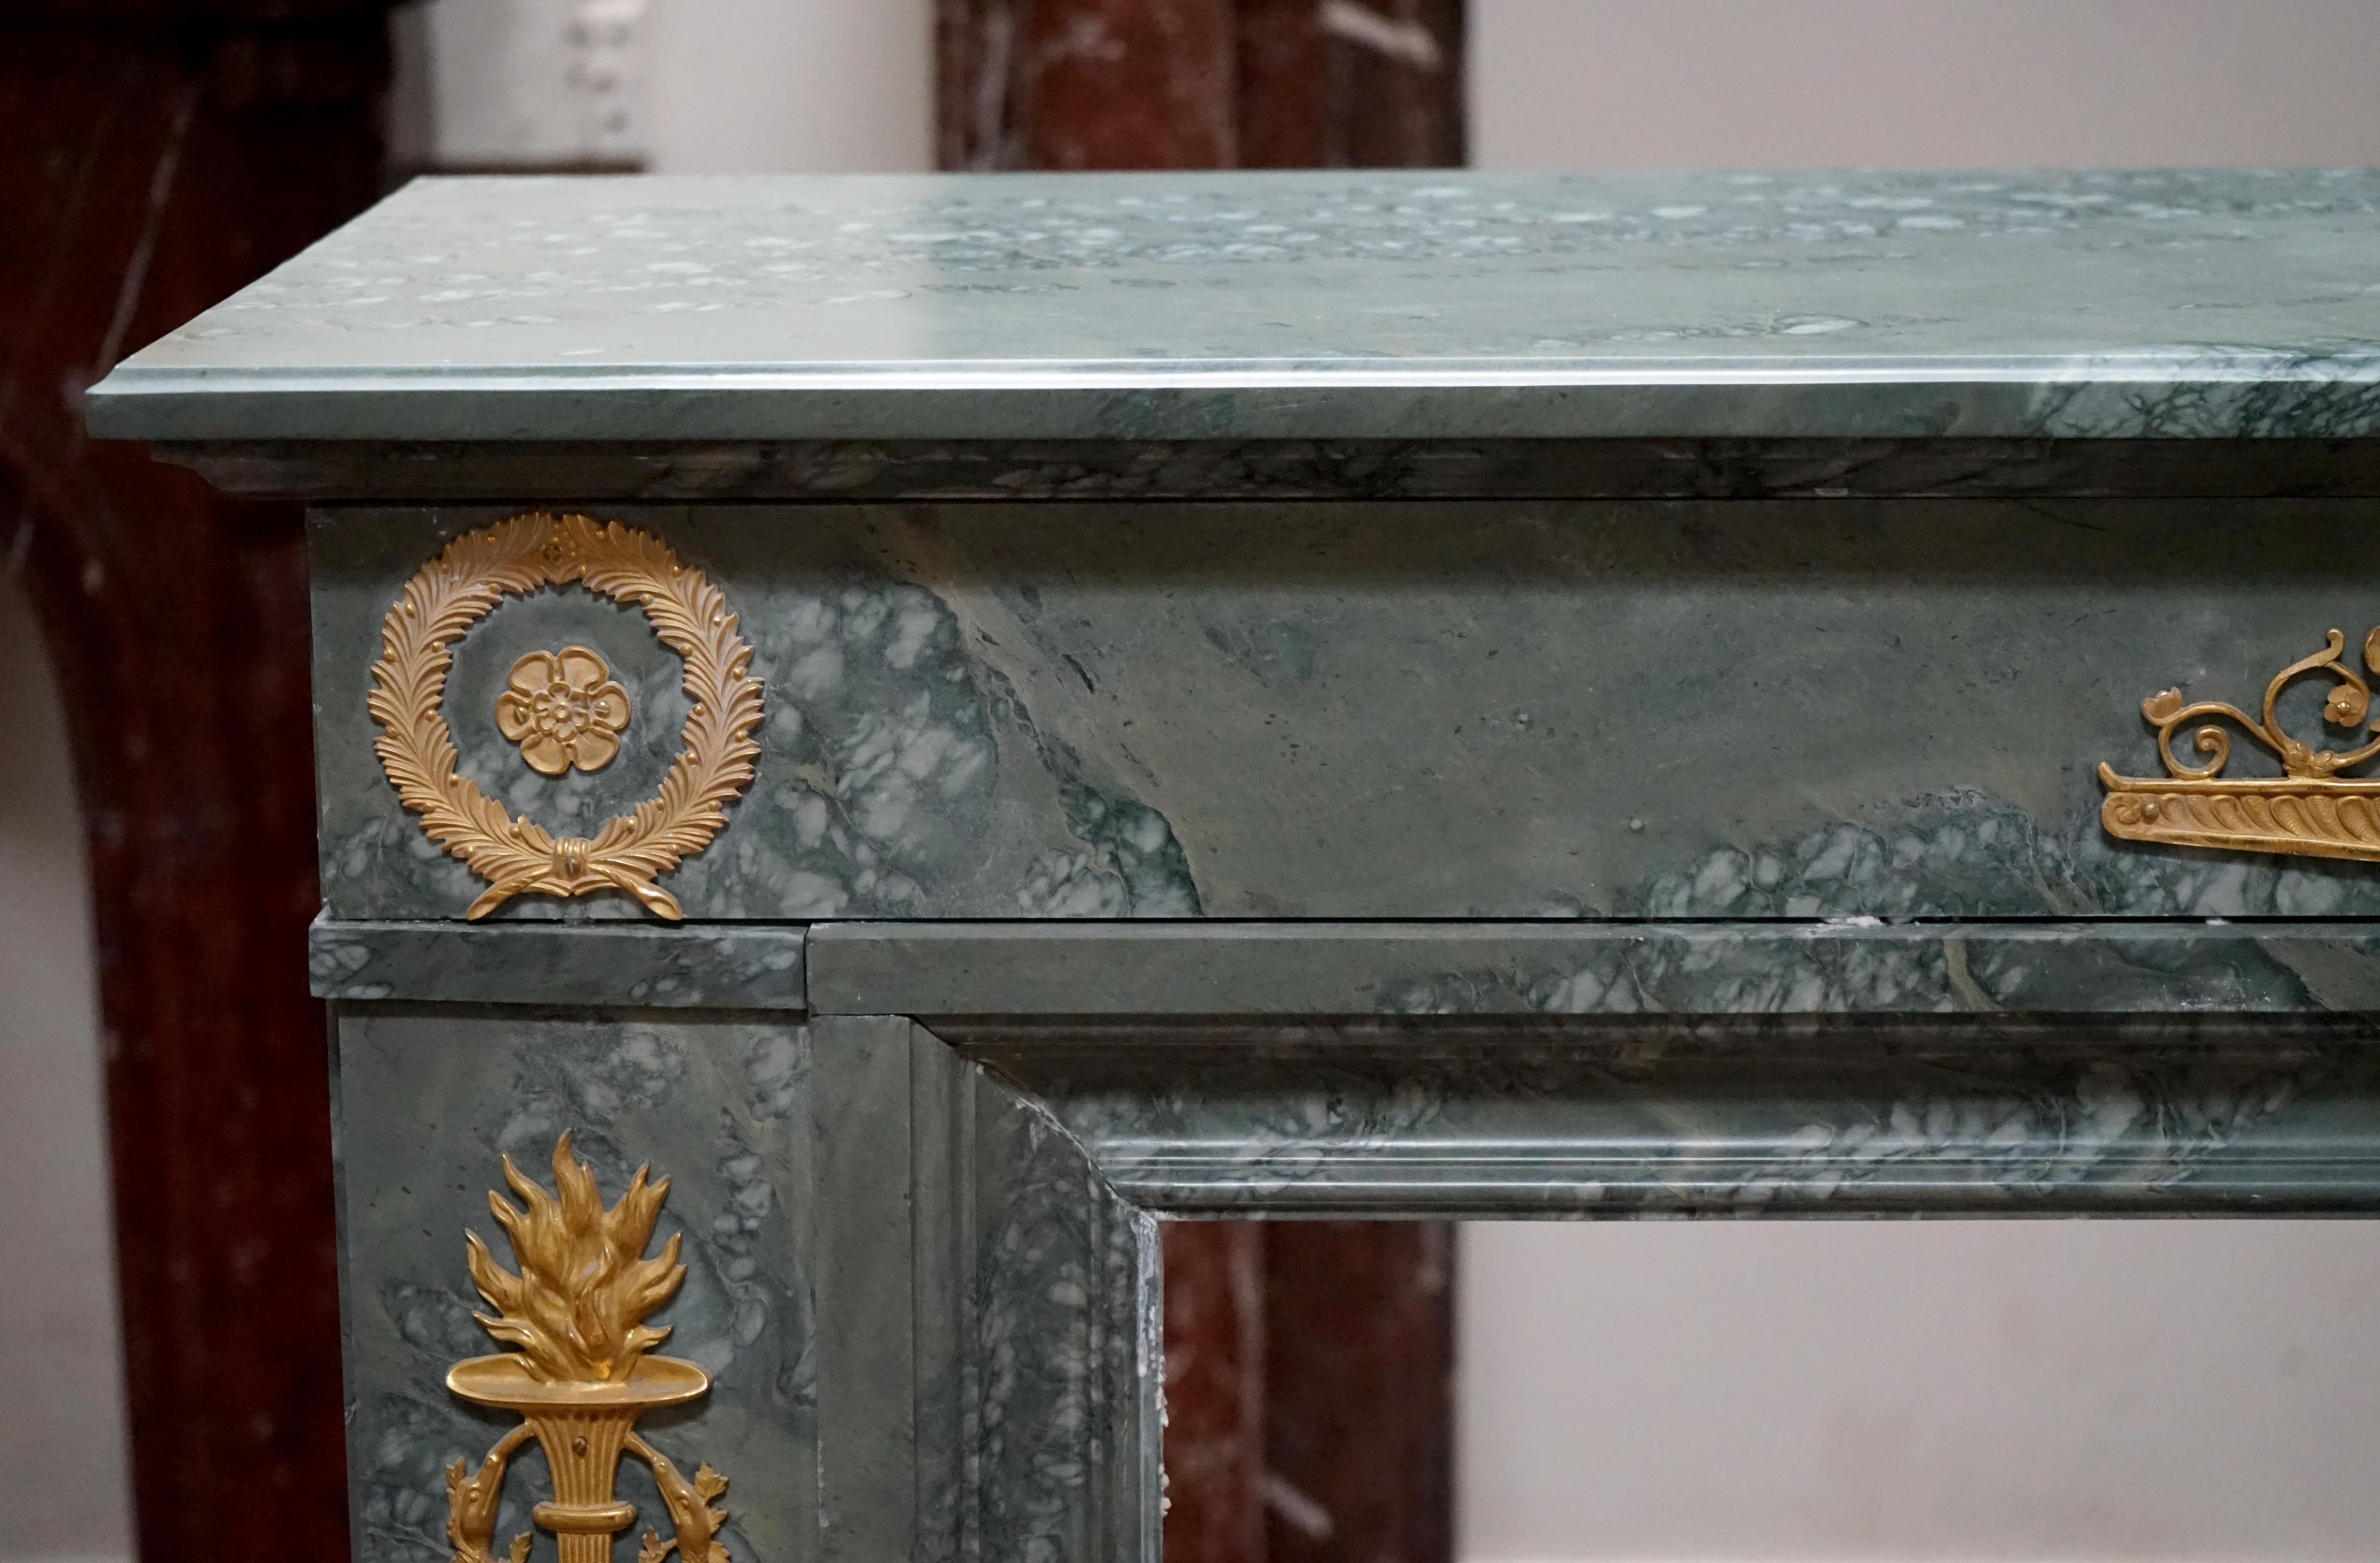 Fine Russian Empire mantel with gilt bronze ormolu fittings. Carved from a rare green-grey marble from Ural Mountains, this mantelpiece features a molded rectangular shelf overhanging a plain lintel fitted with a pair of gilt bronze wreaths in each